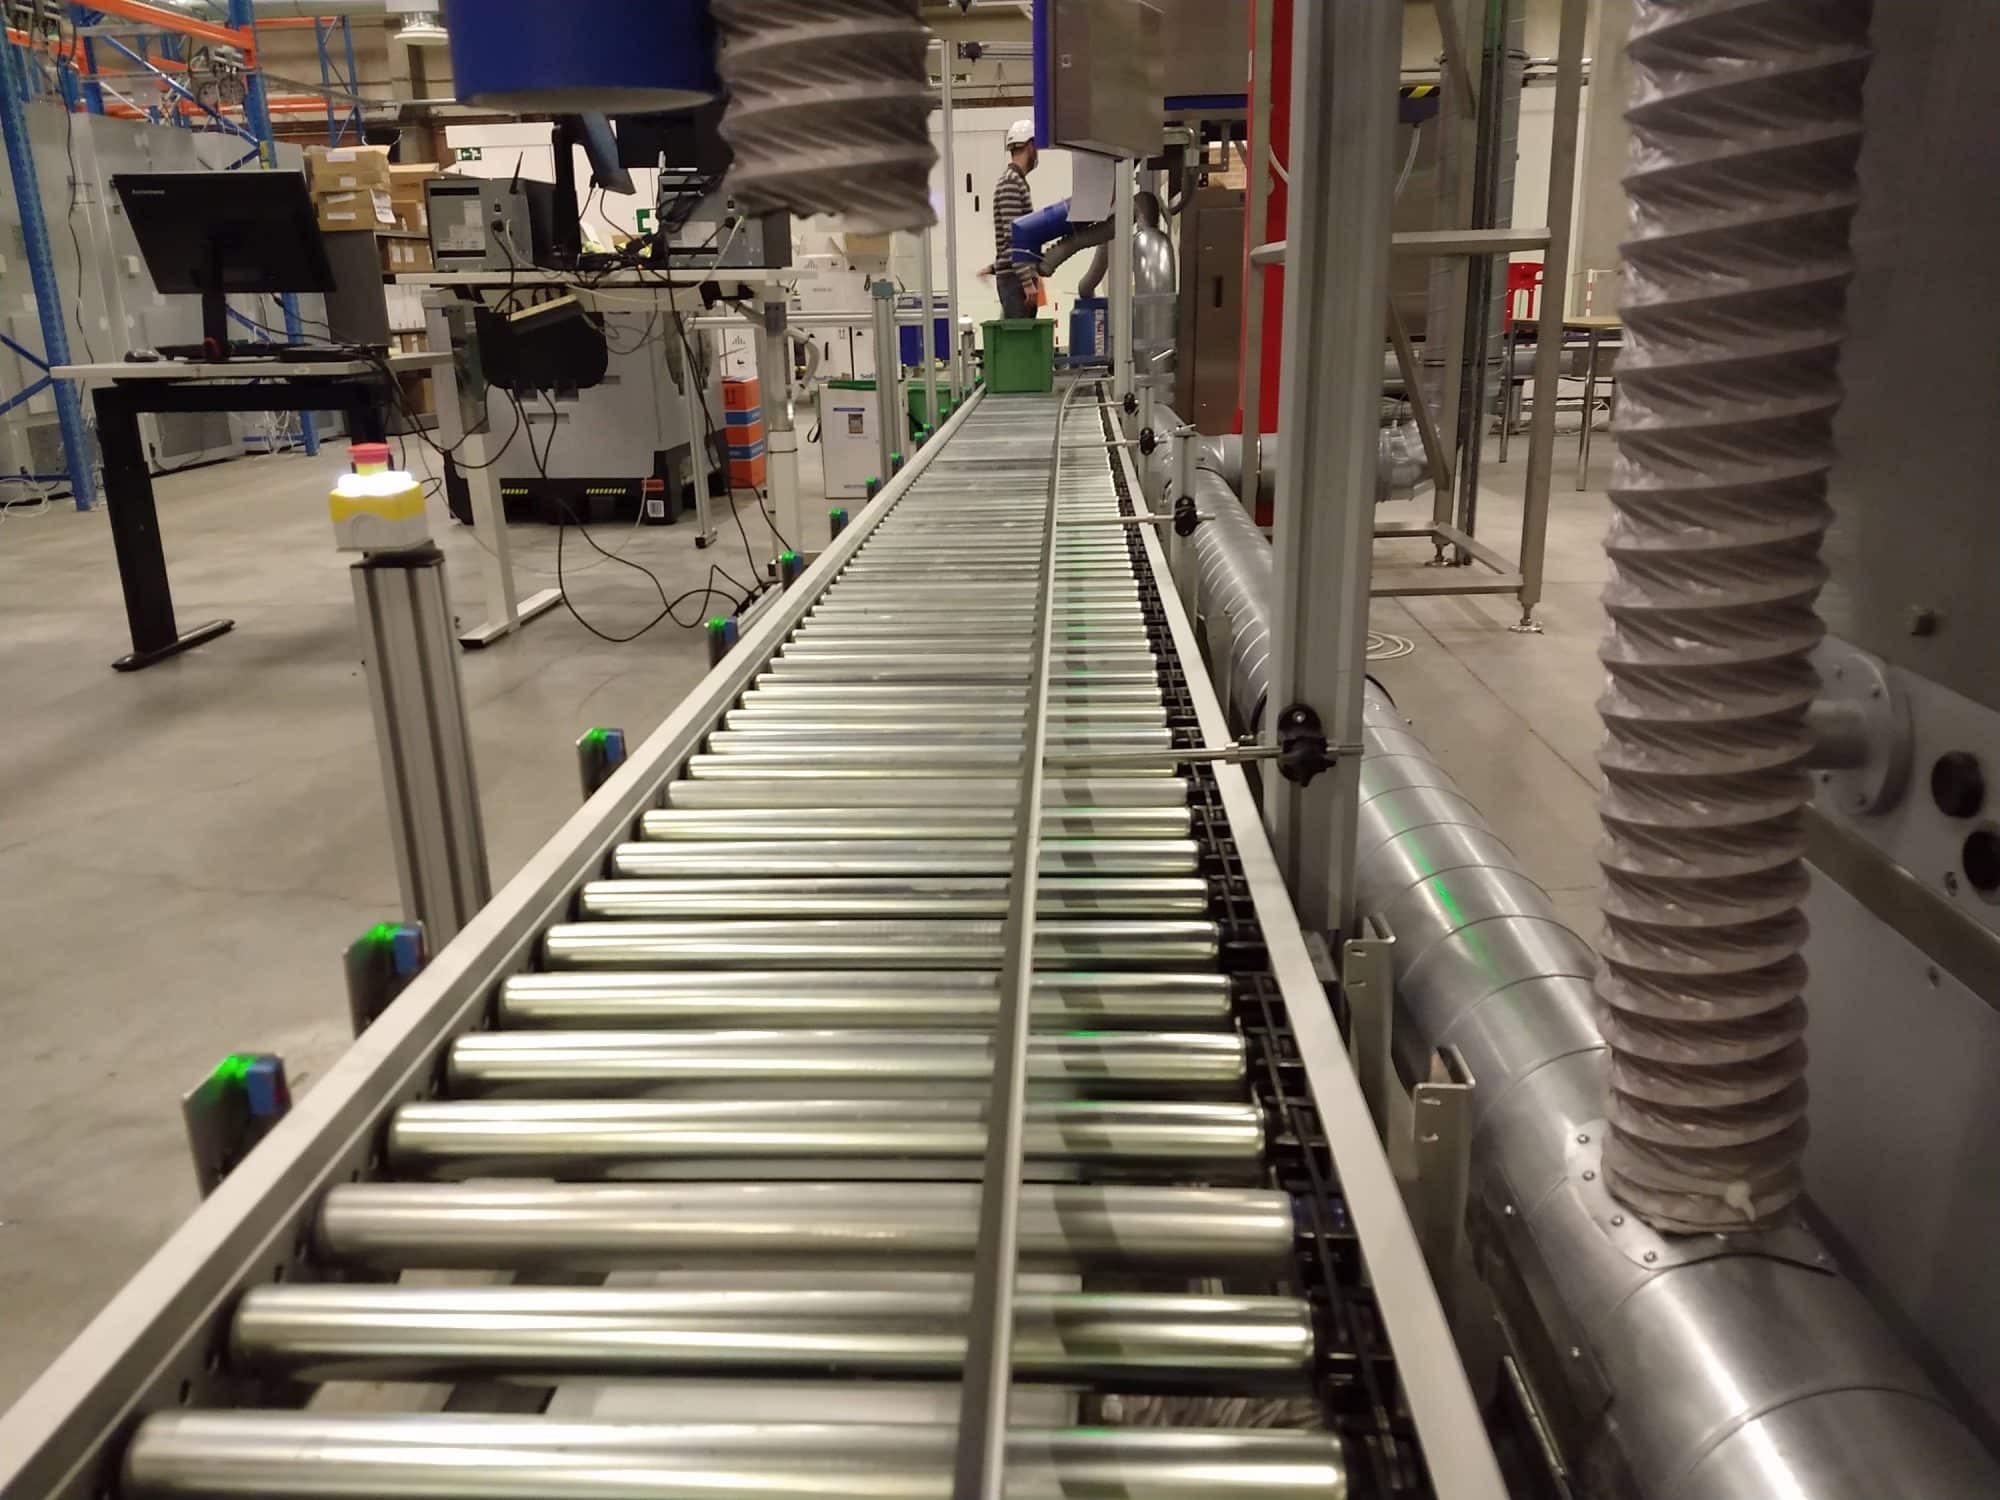 One of our RCB roller conveyor systems in the warehouse of one of our clients.